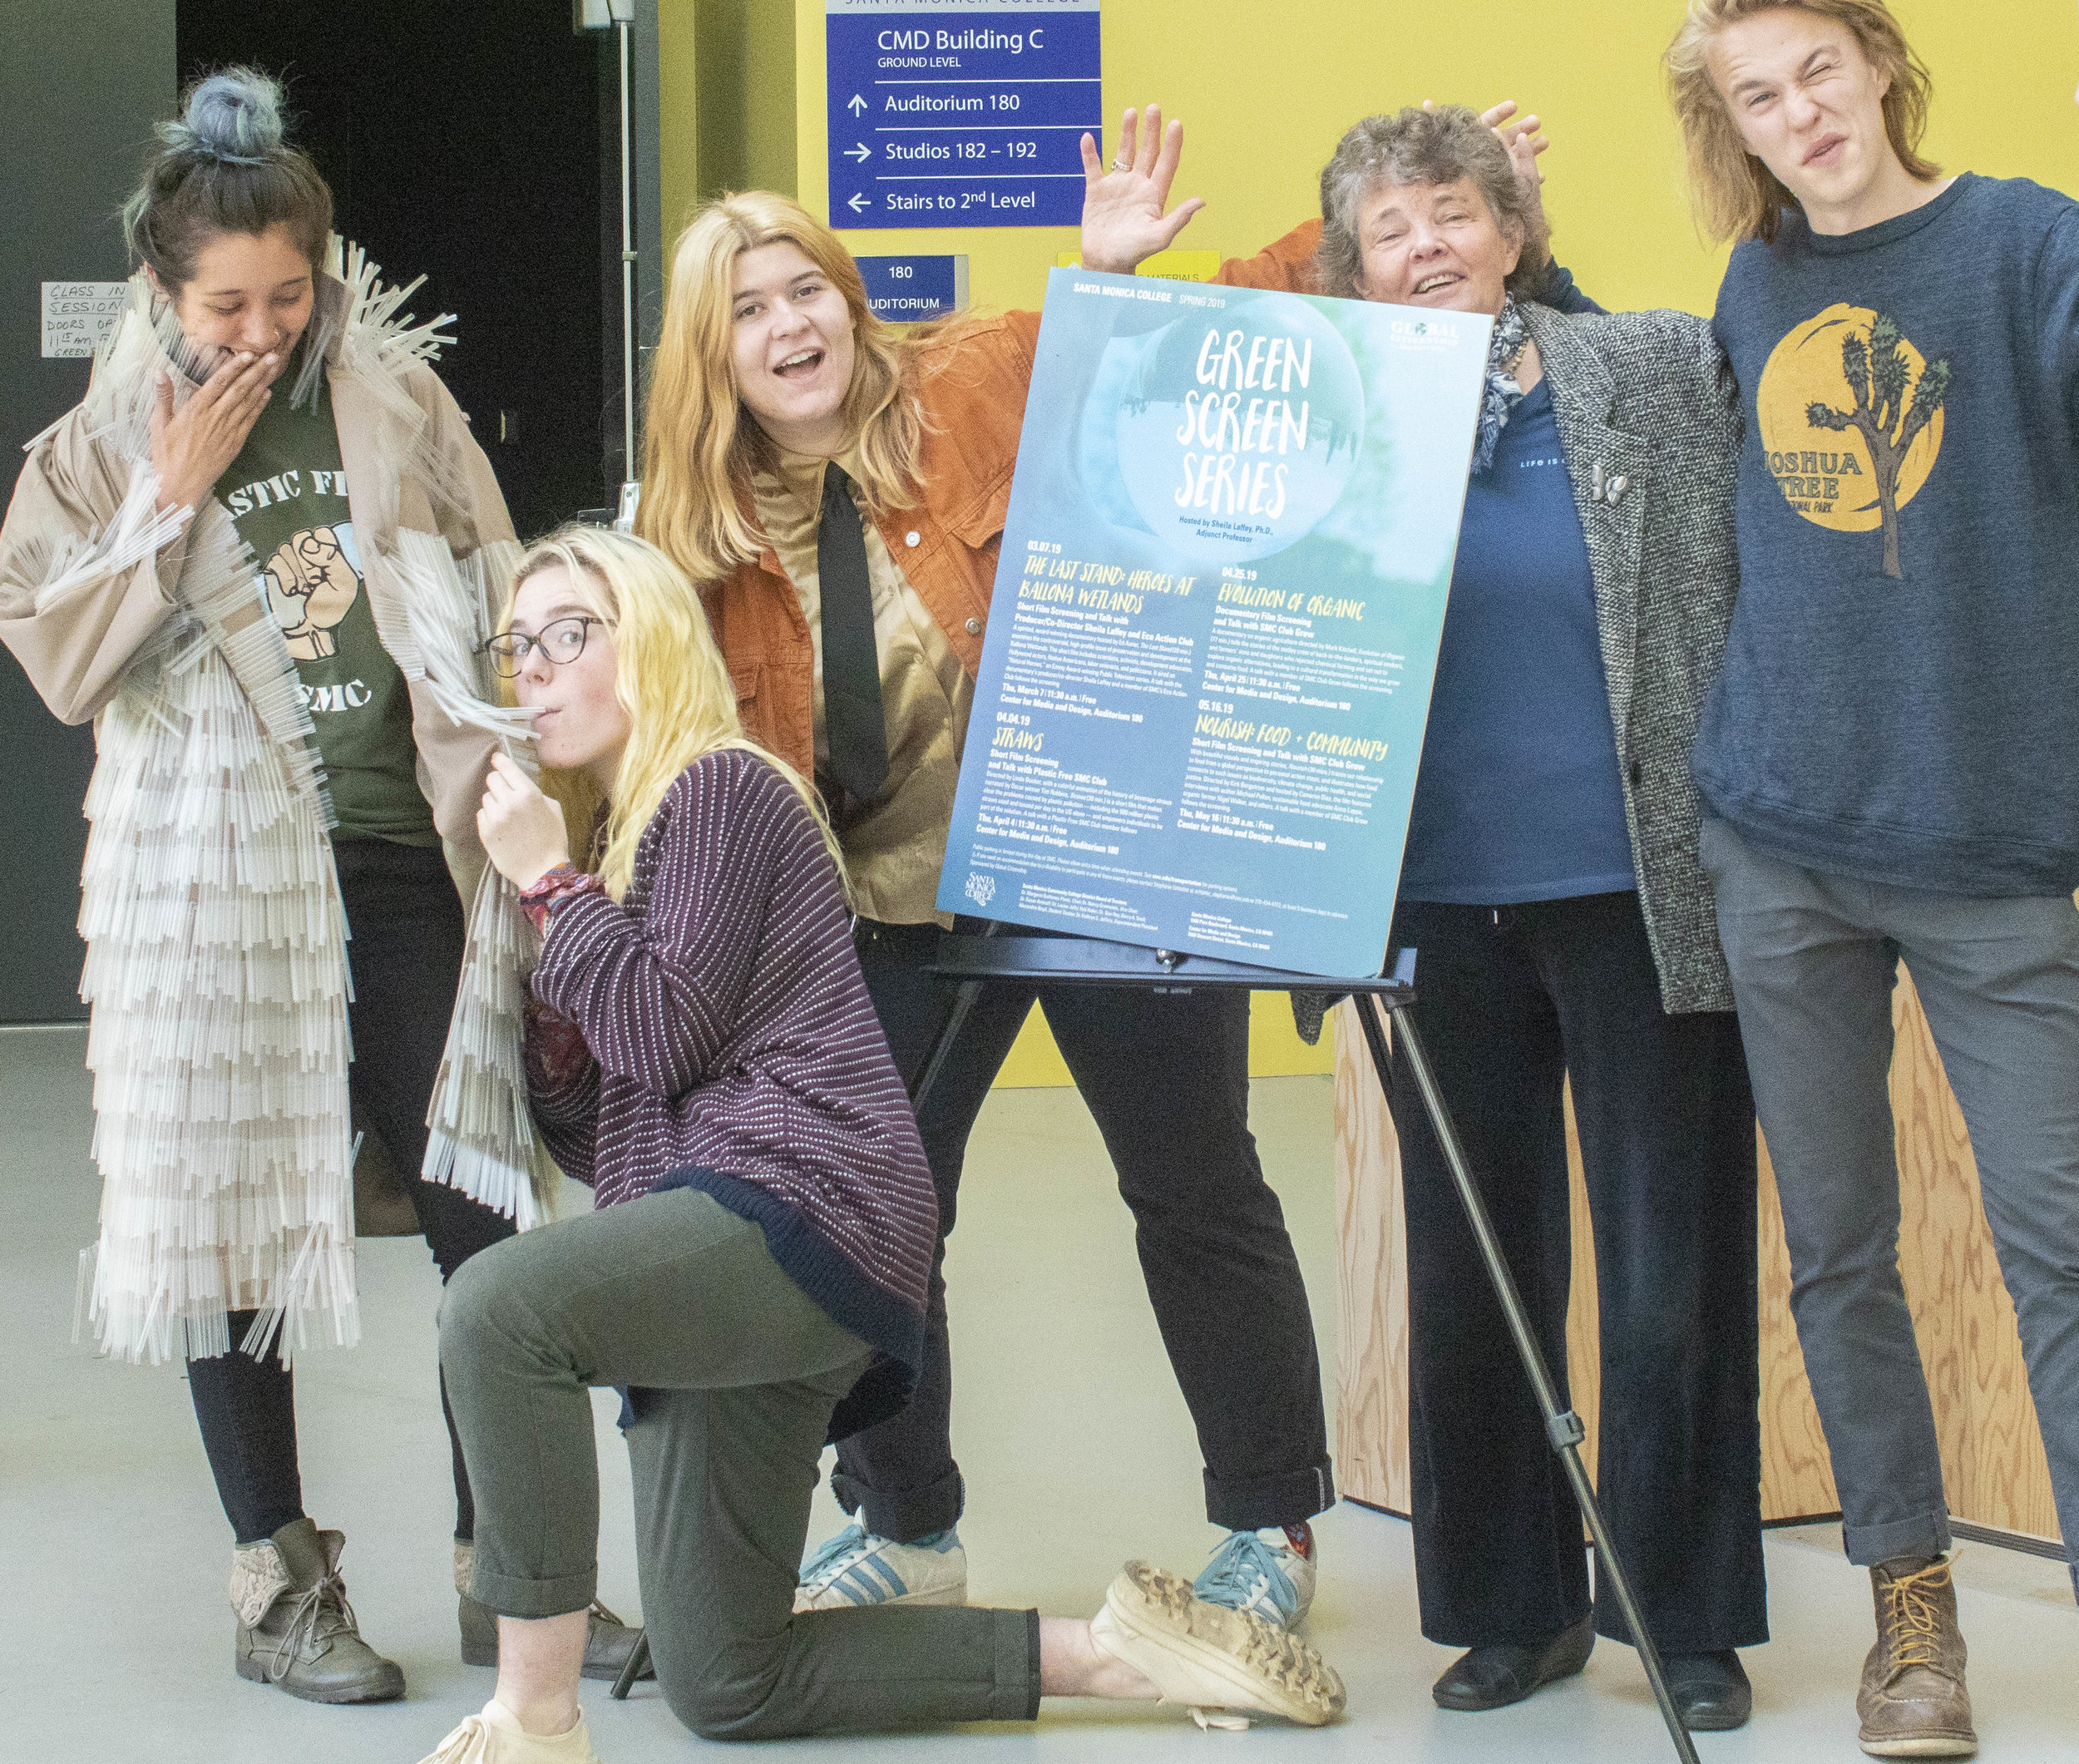  Santa Monica College (SMC) students and Sustainability Club members, Brooke Harrington (left), Carla Claure, Carly Havenick, Liam Hay (far right), with Adjunct Professor Sheila Laffey (second to right), pose out front of the auditorium of the Center